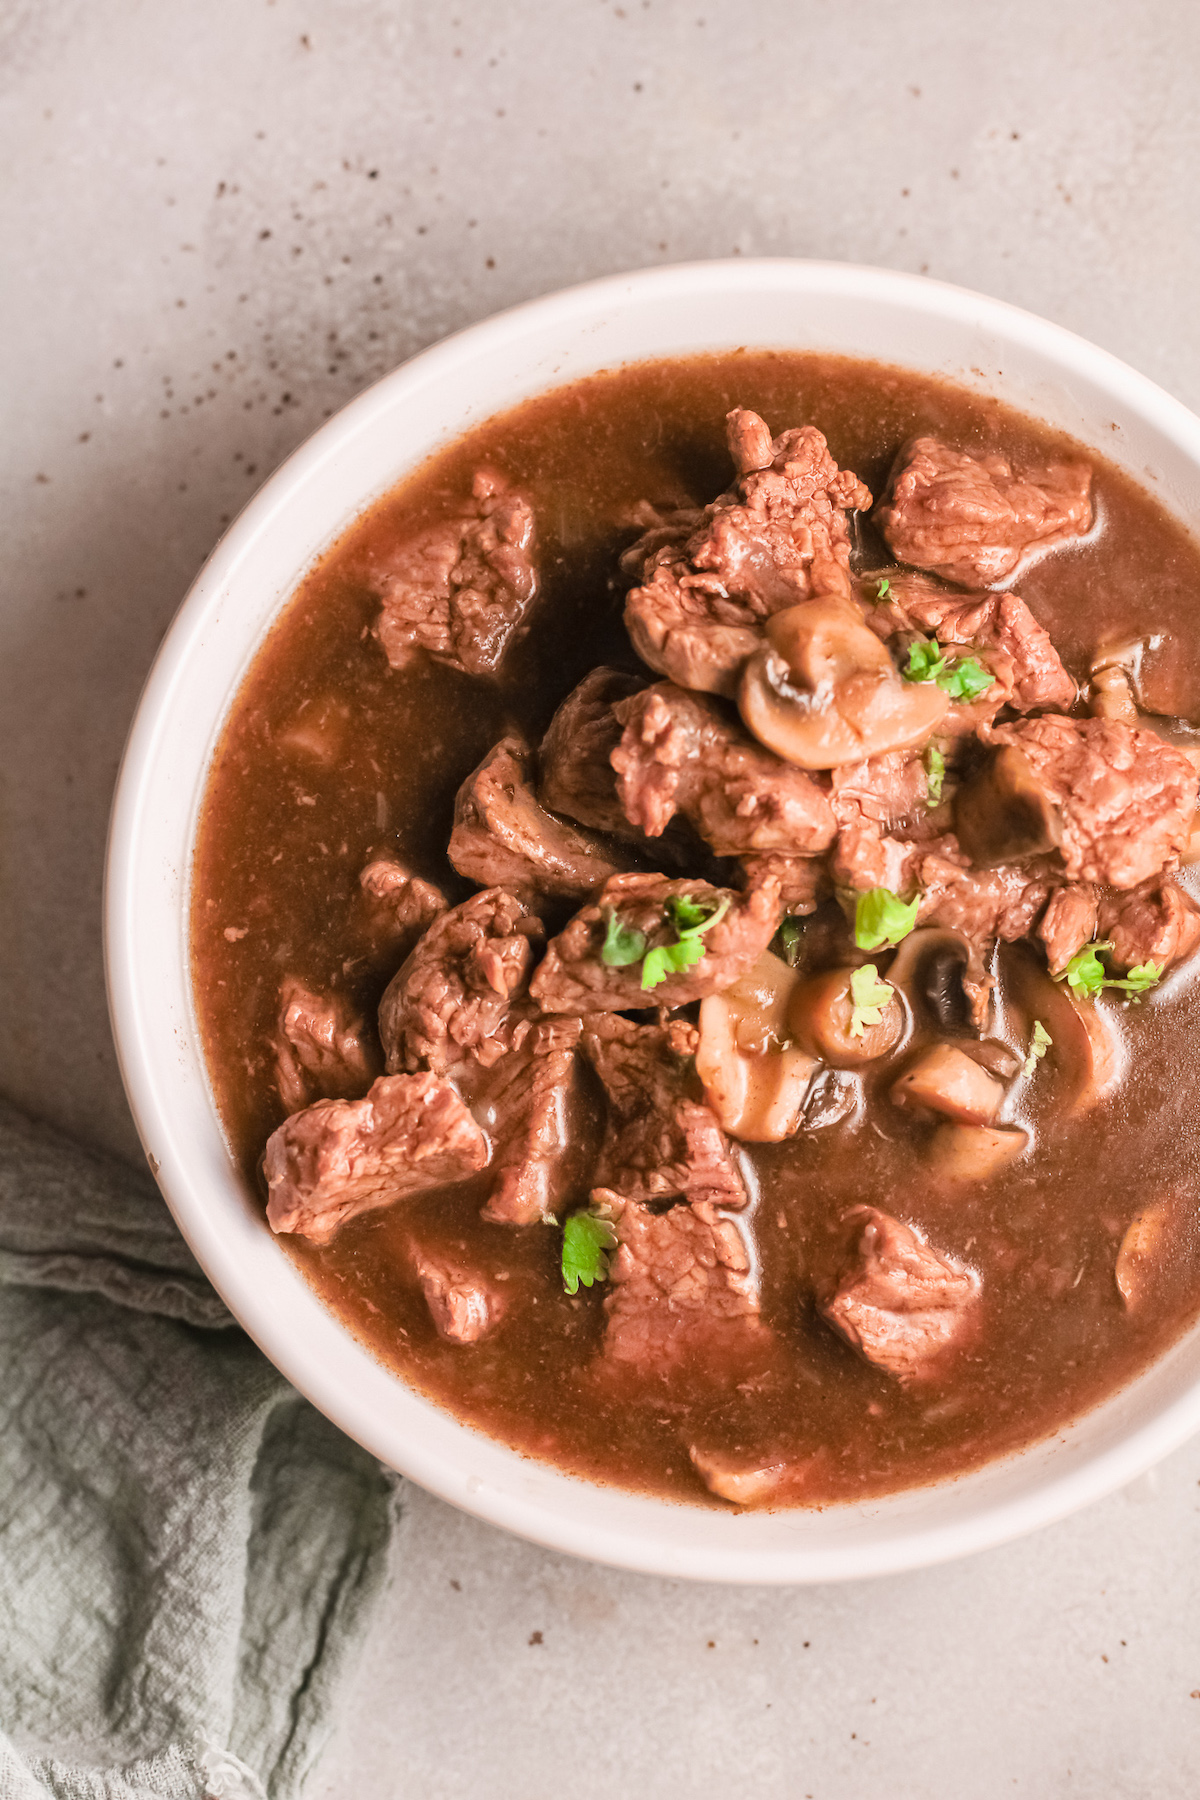 the completed Instant Pot Beef Tips served in a ceramic bowl